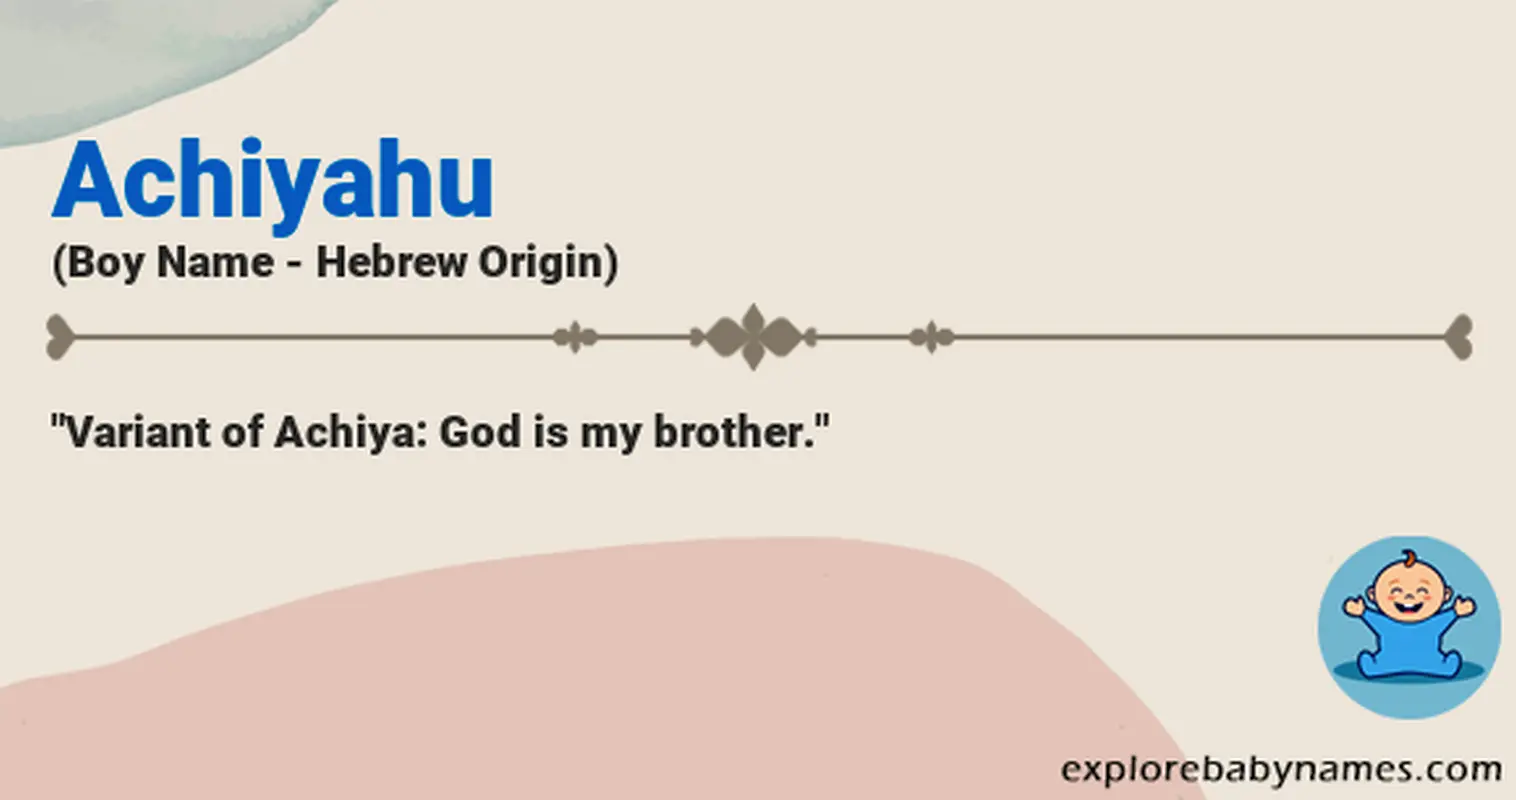 Meaning of Achiyahu